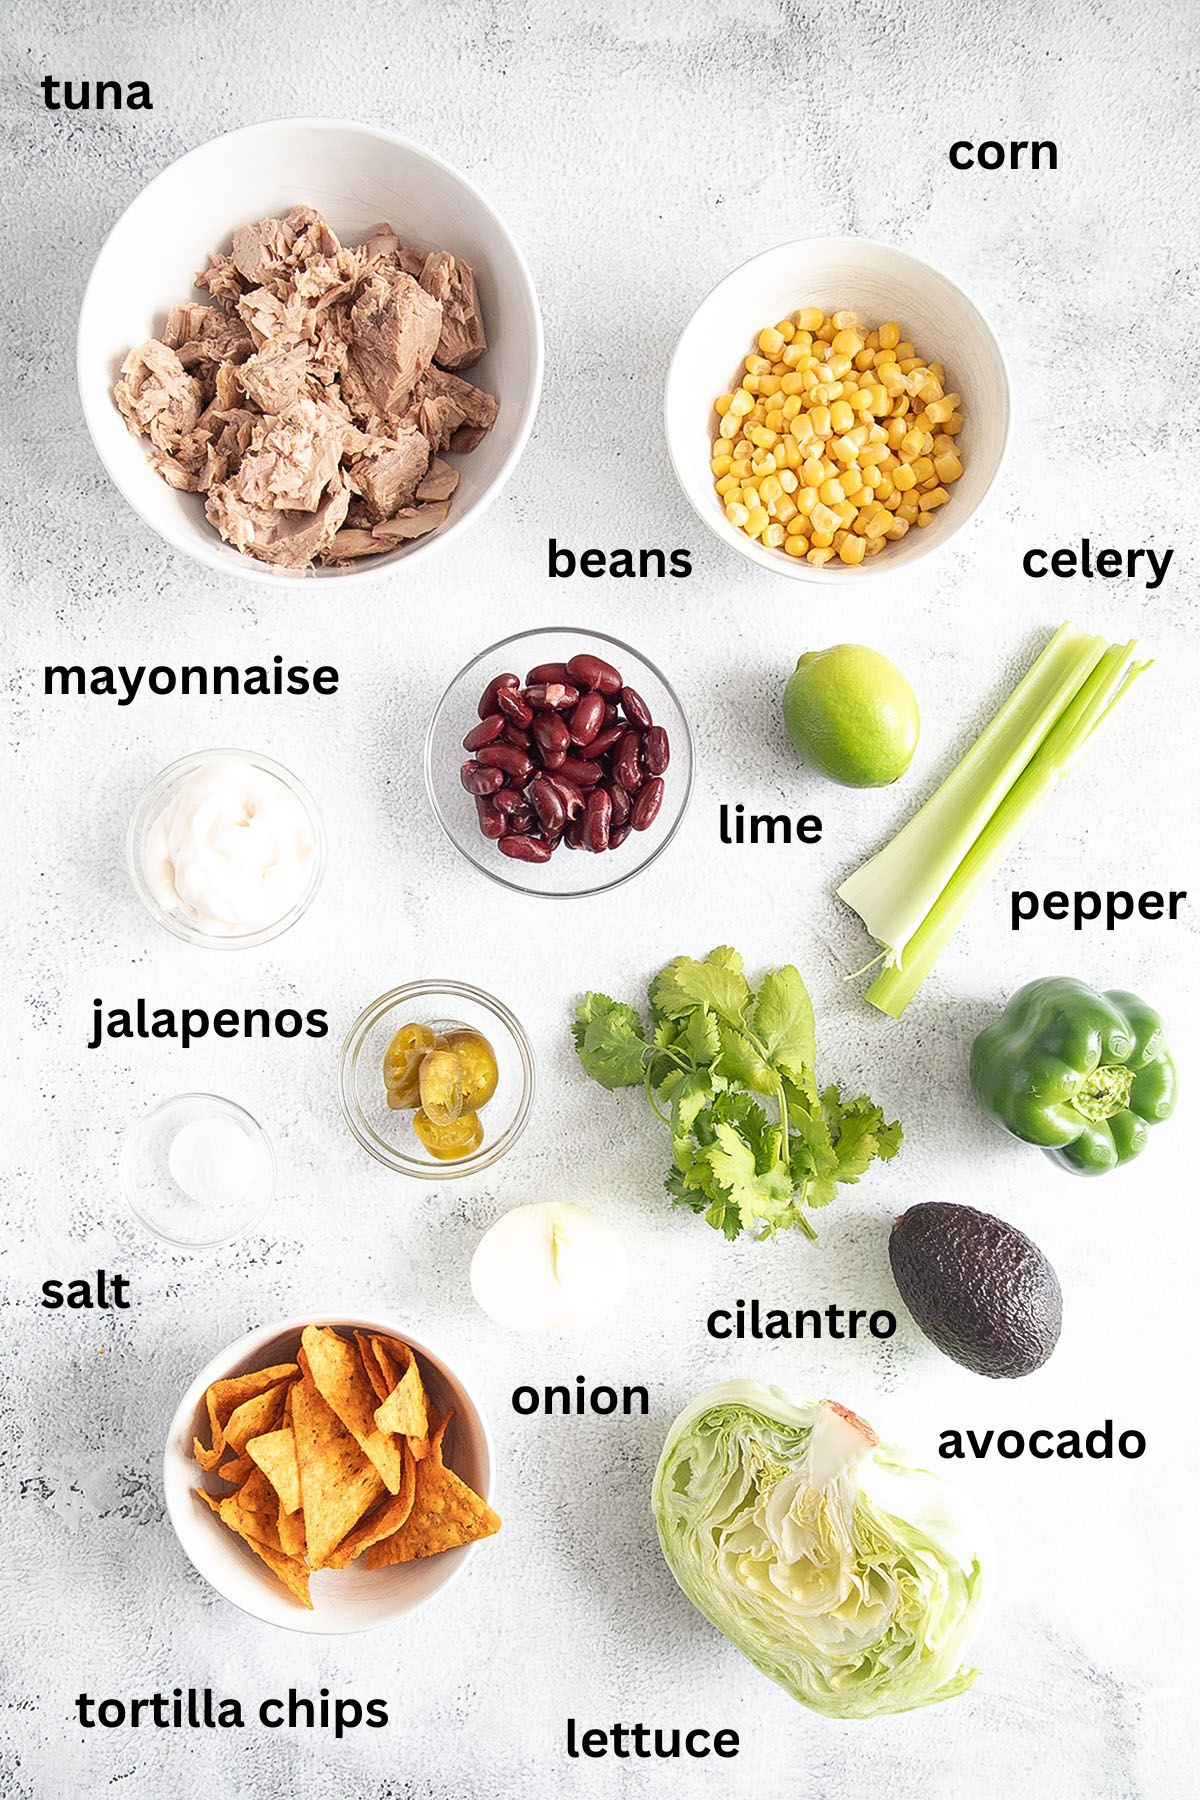 listed ingredients for making tuna salad with corn and beans.